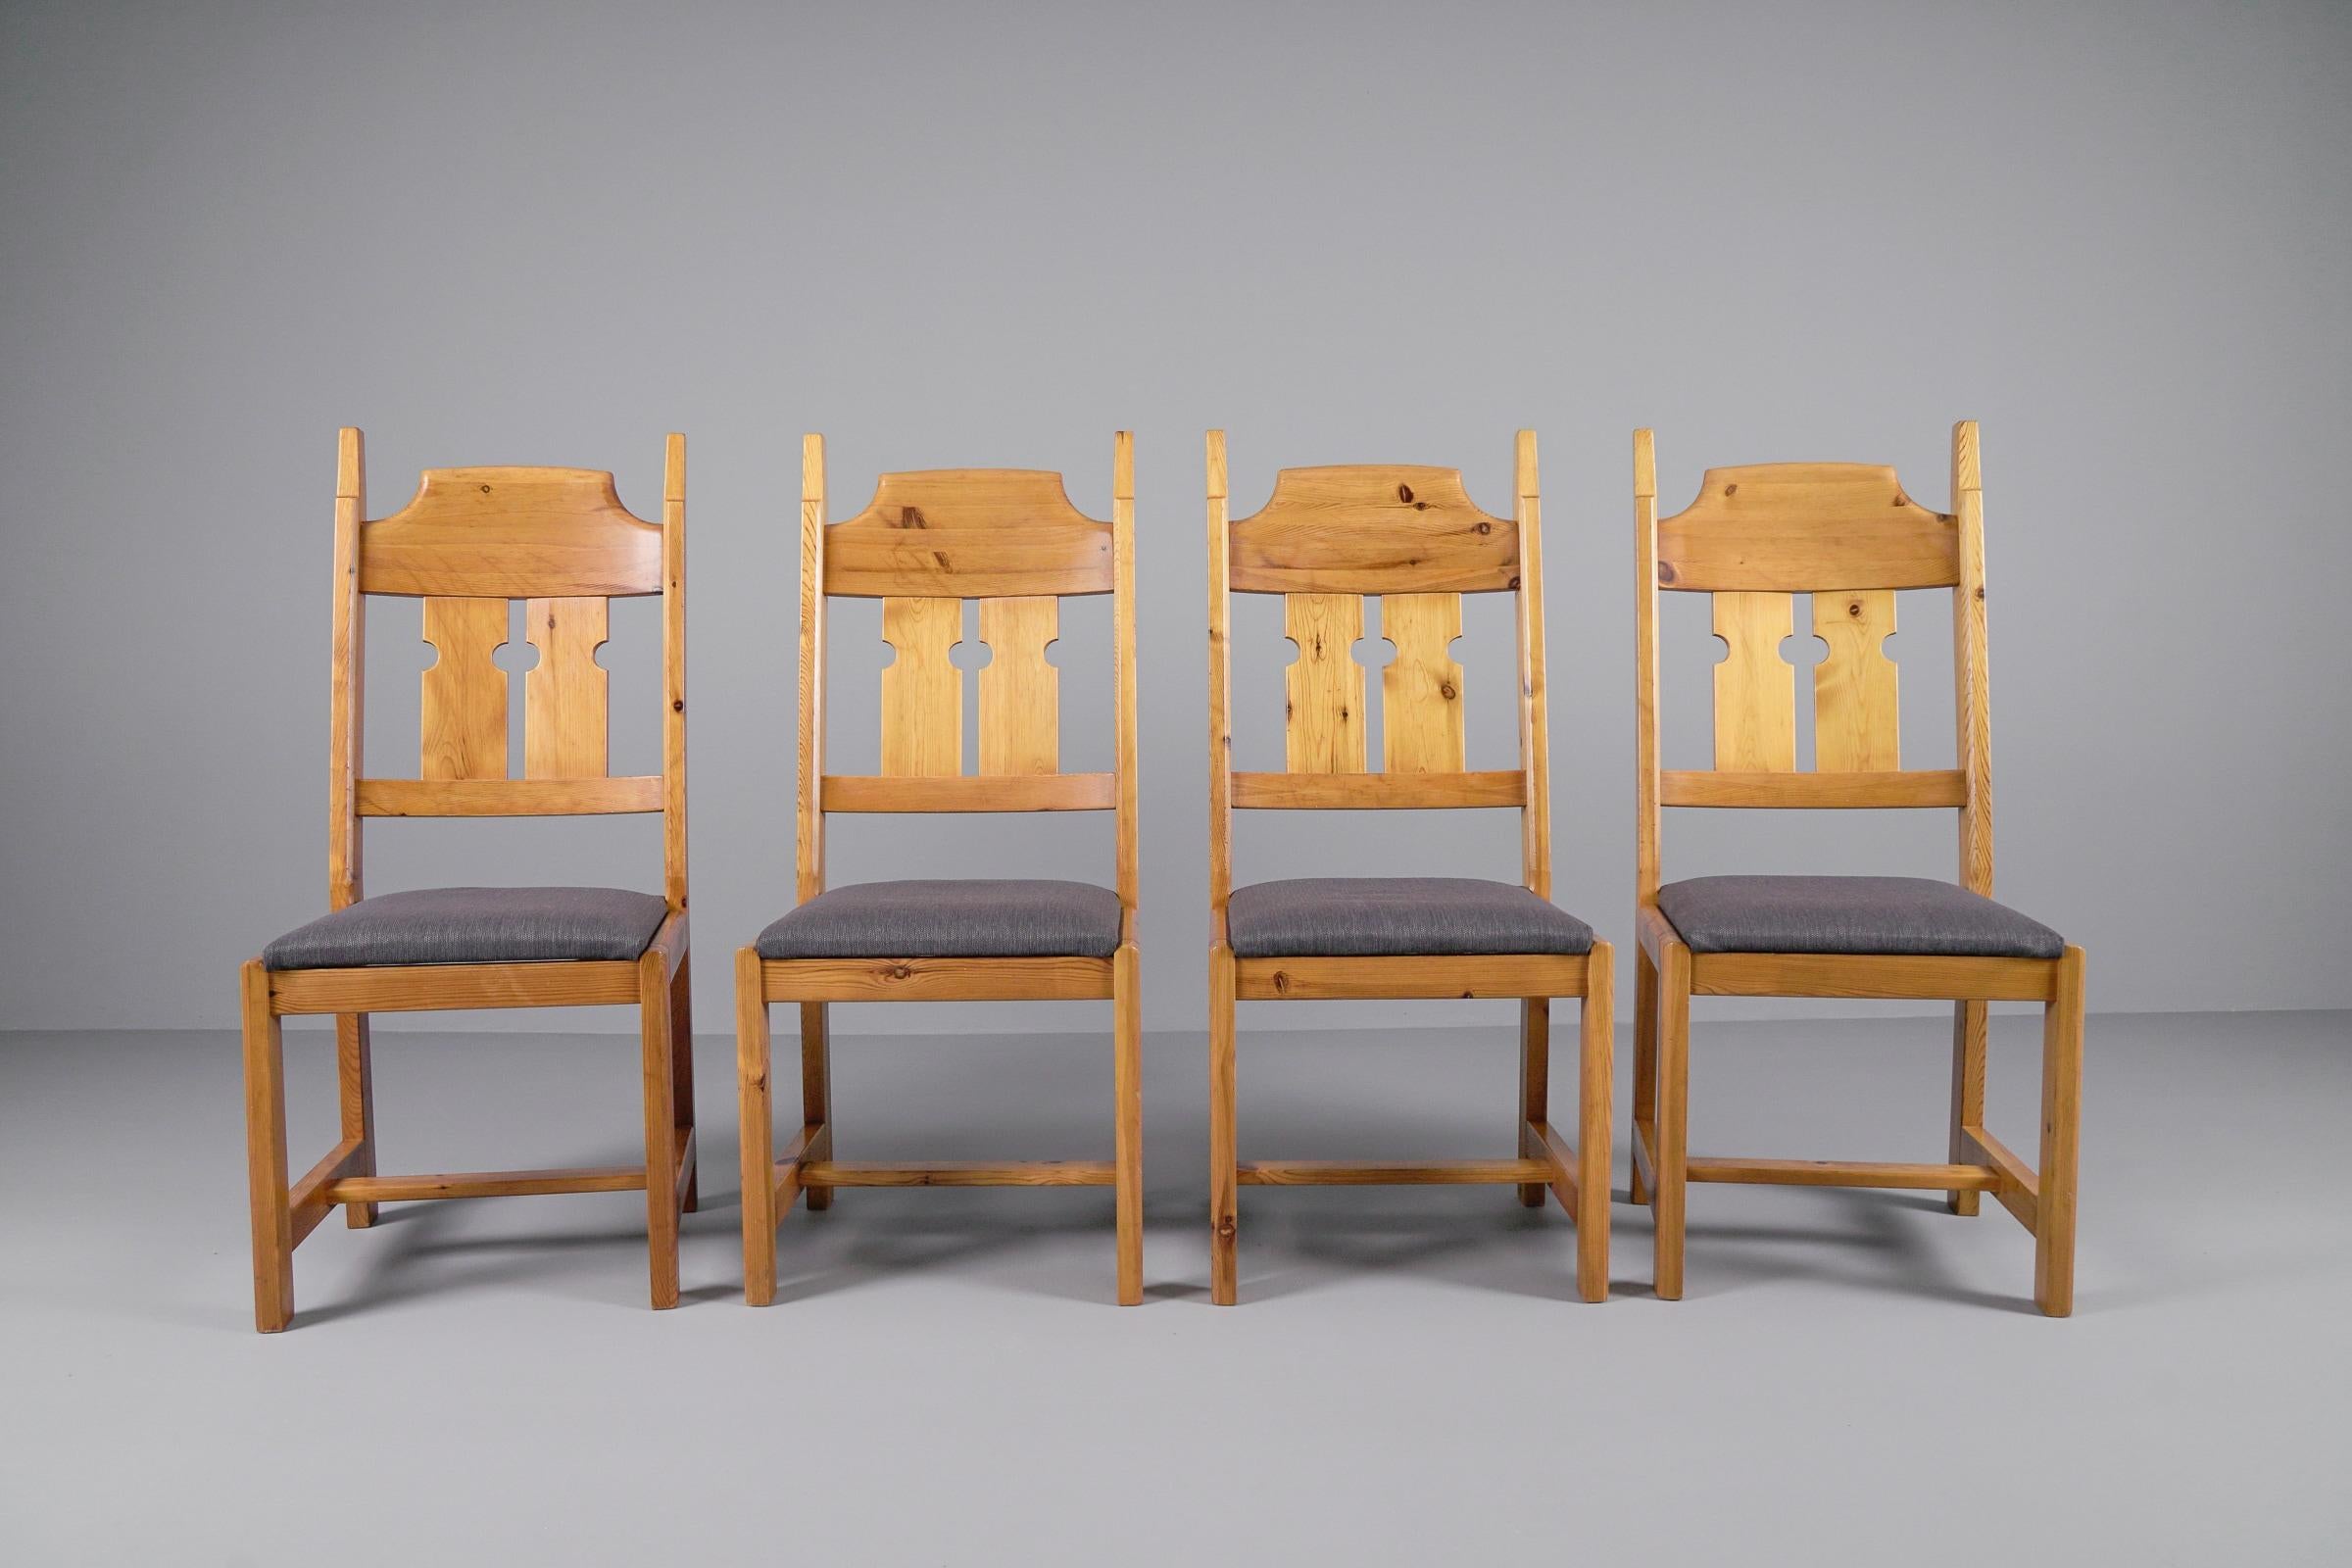 Extremely rare set of 4 from the Swedish wood manufacturer Furusnickarn AB. 

Pine wood and upholstered seat in upholstery fabric. 

Good to very good condition with normal signs of use.